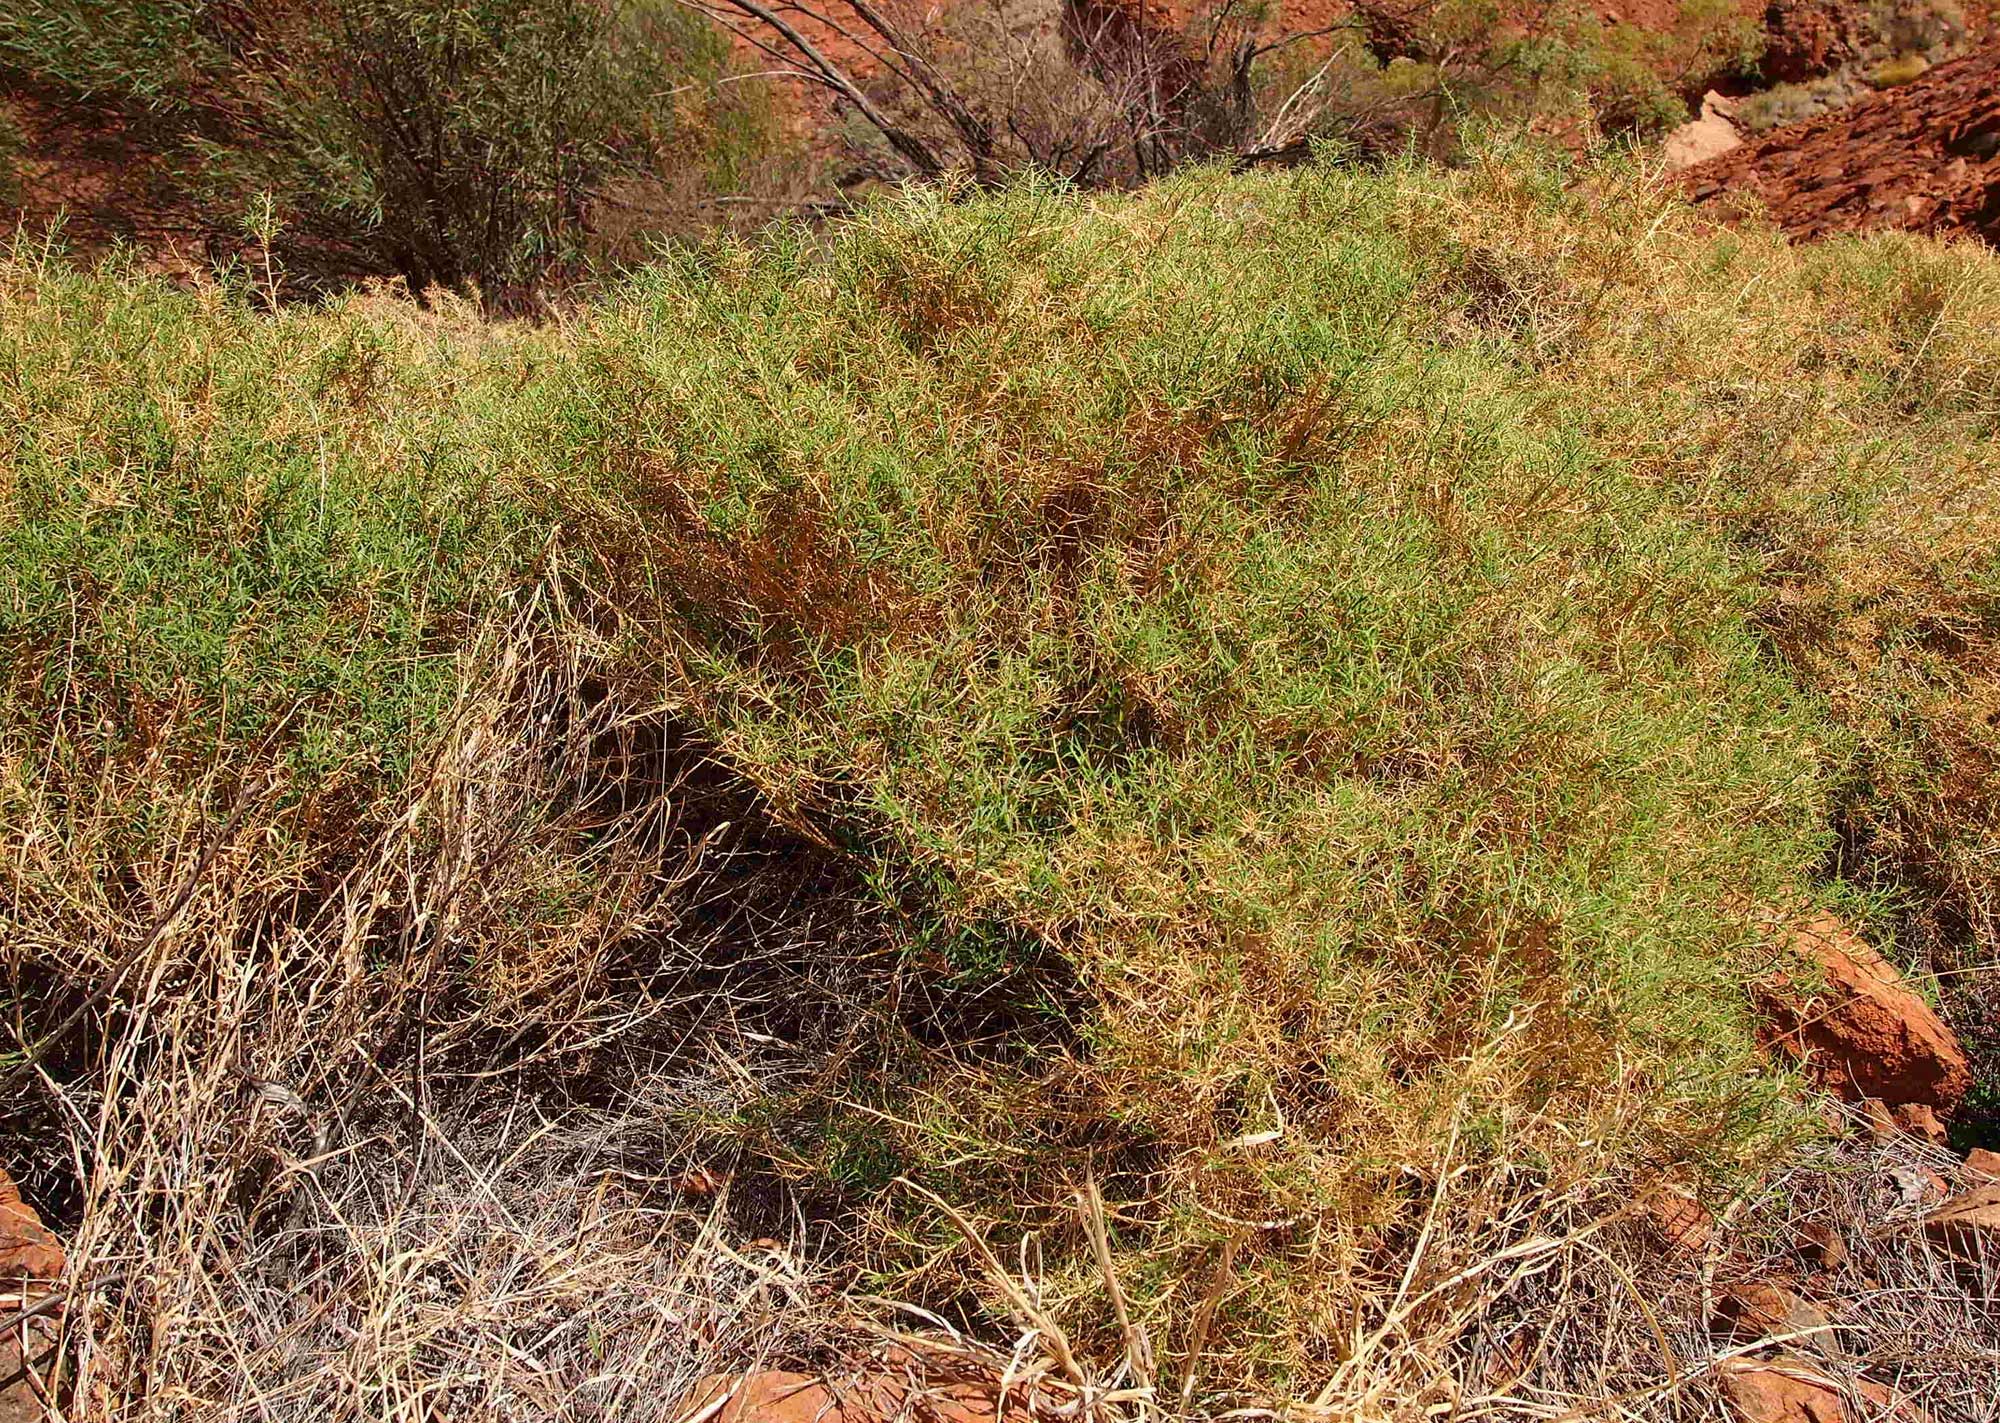 Photograph of a clump of Wanderrie grass in Australia. The photo shwos a shrub-like plant growing in red soil.